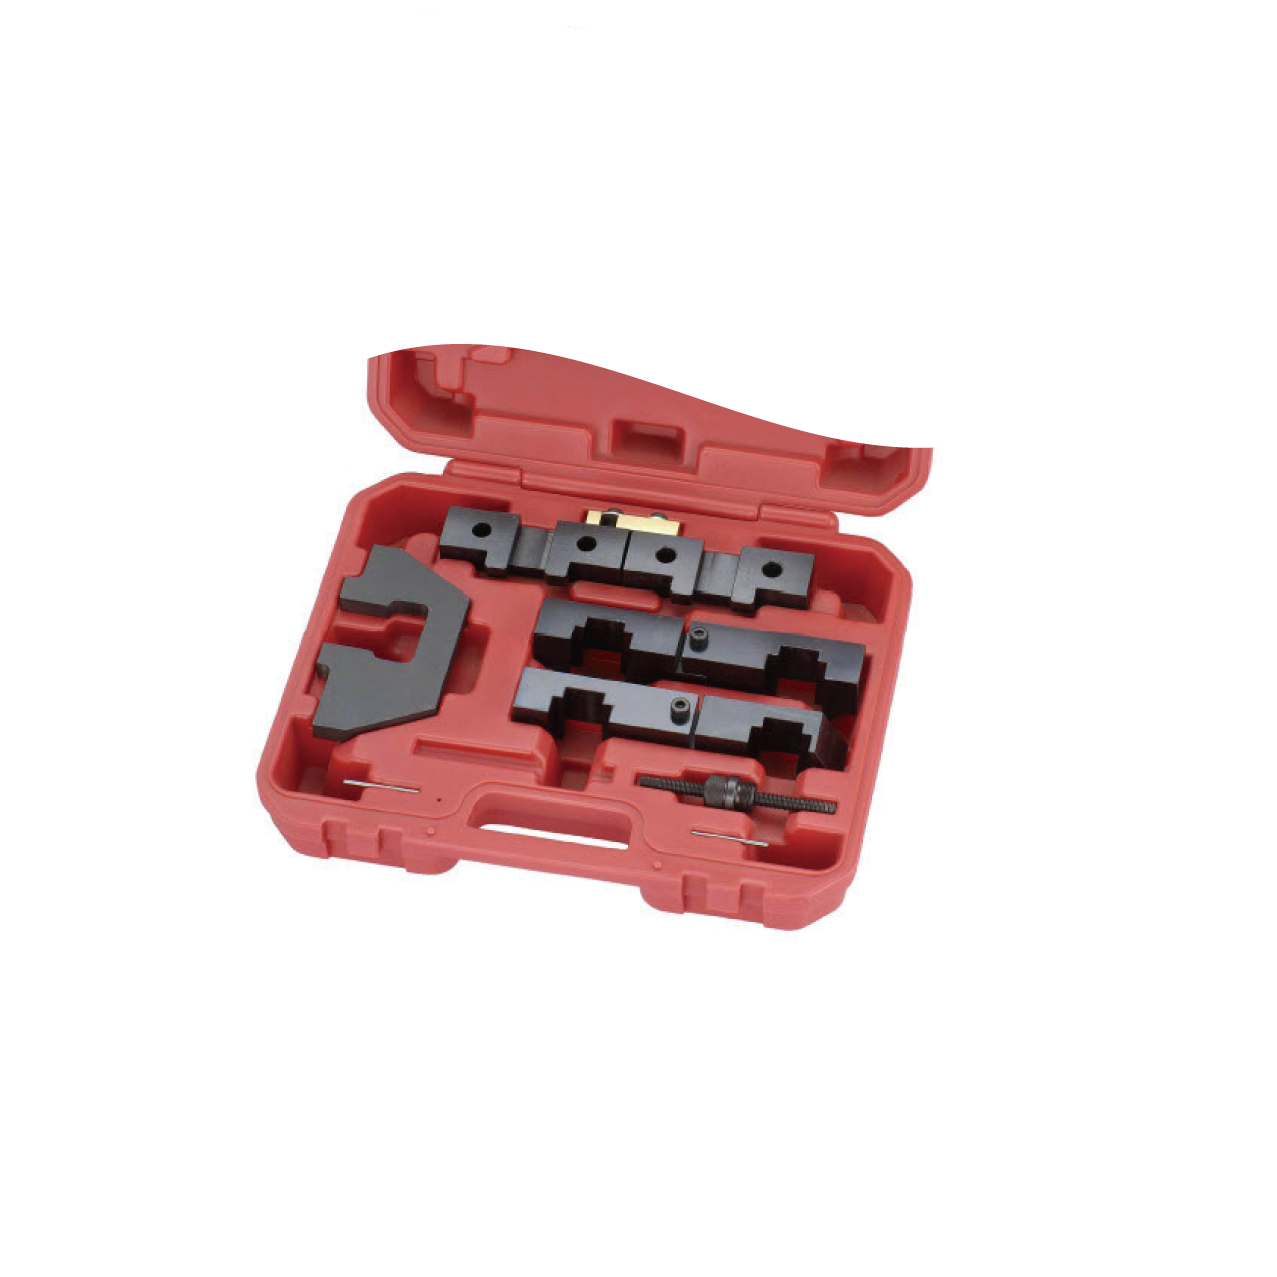 Camshaft Alignment Tool Kit for BMW